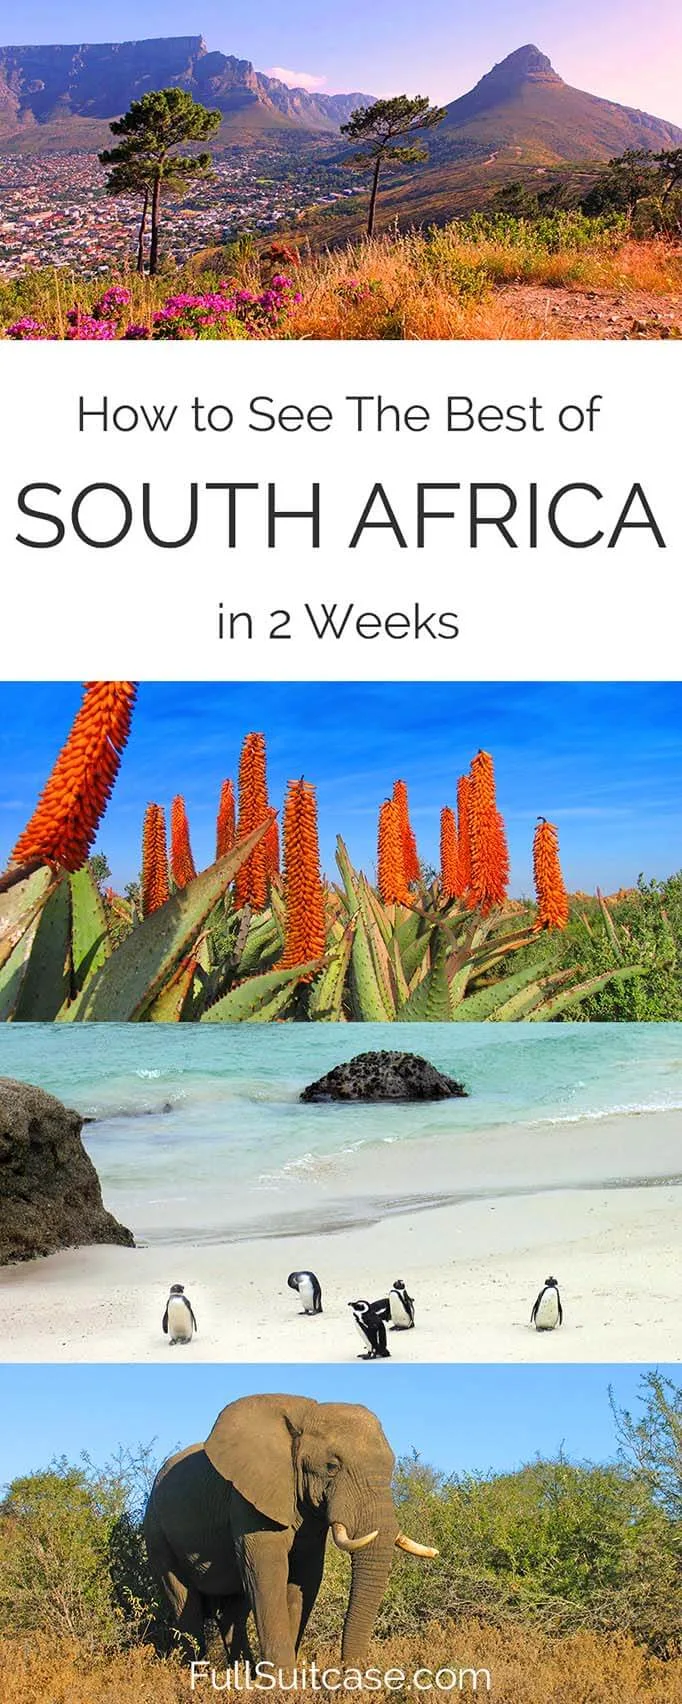 See the best of South Africa with this complete 2 week itinerary